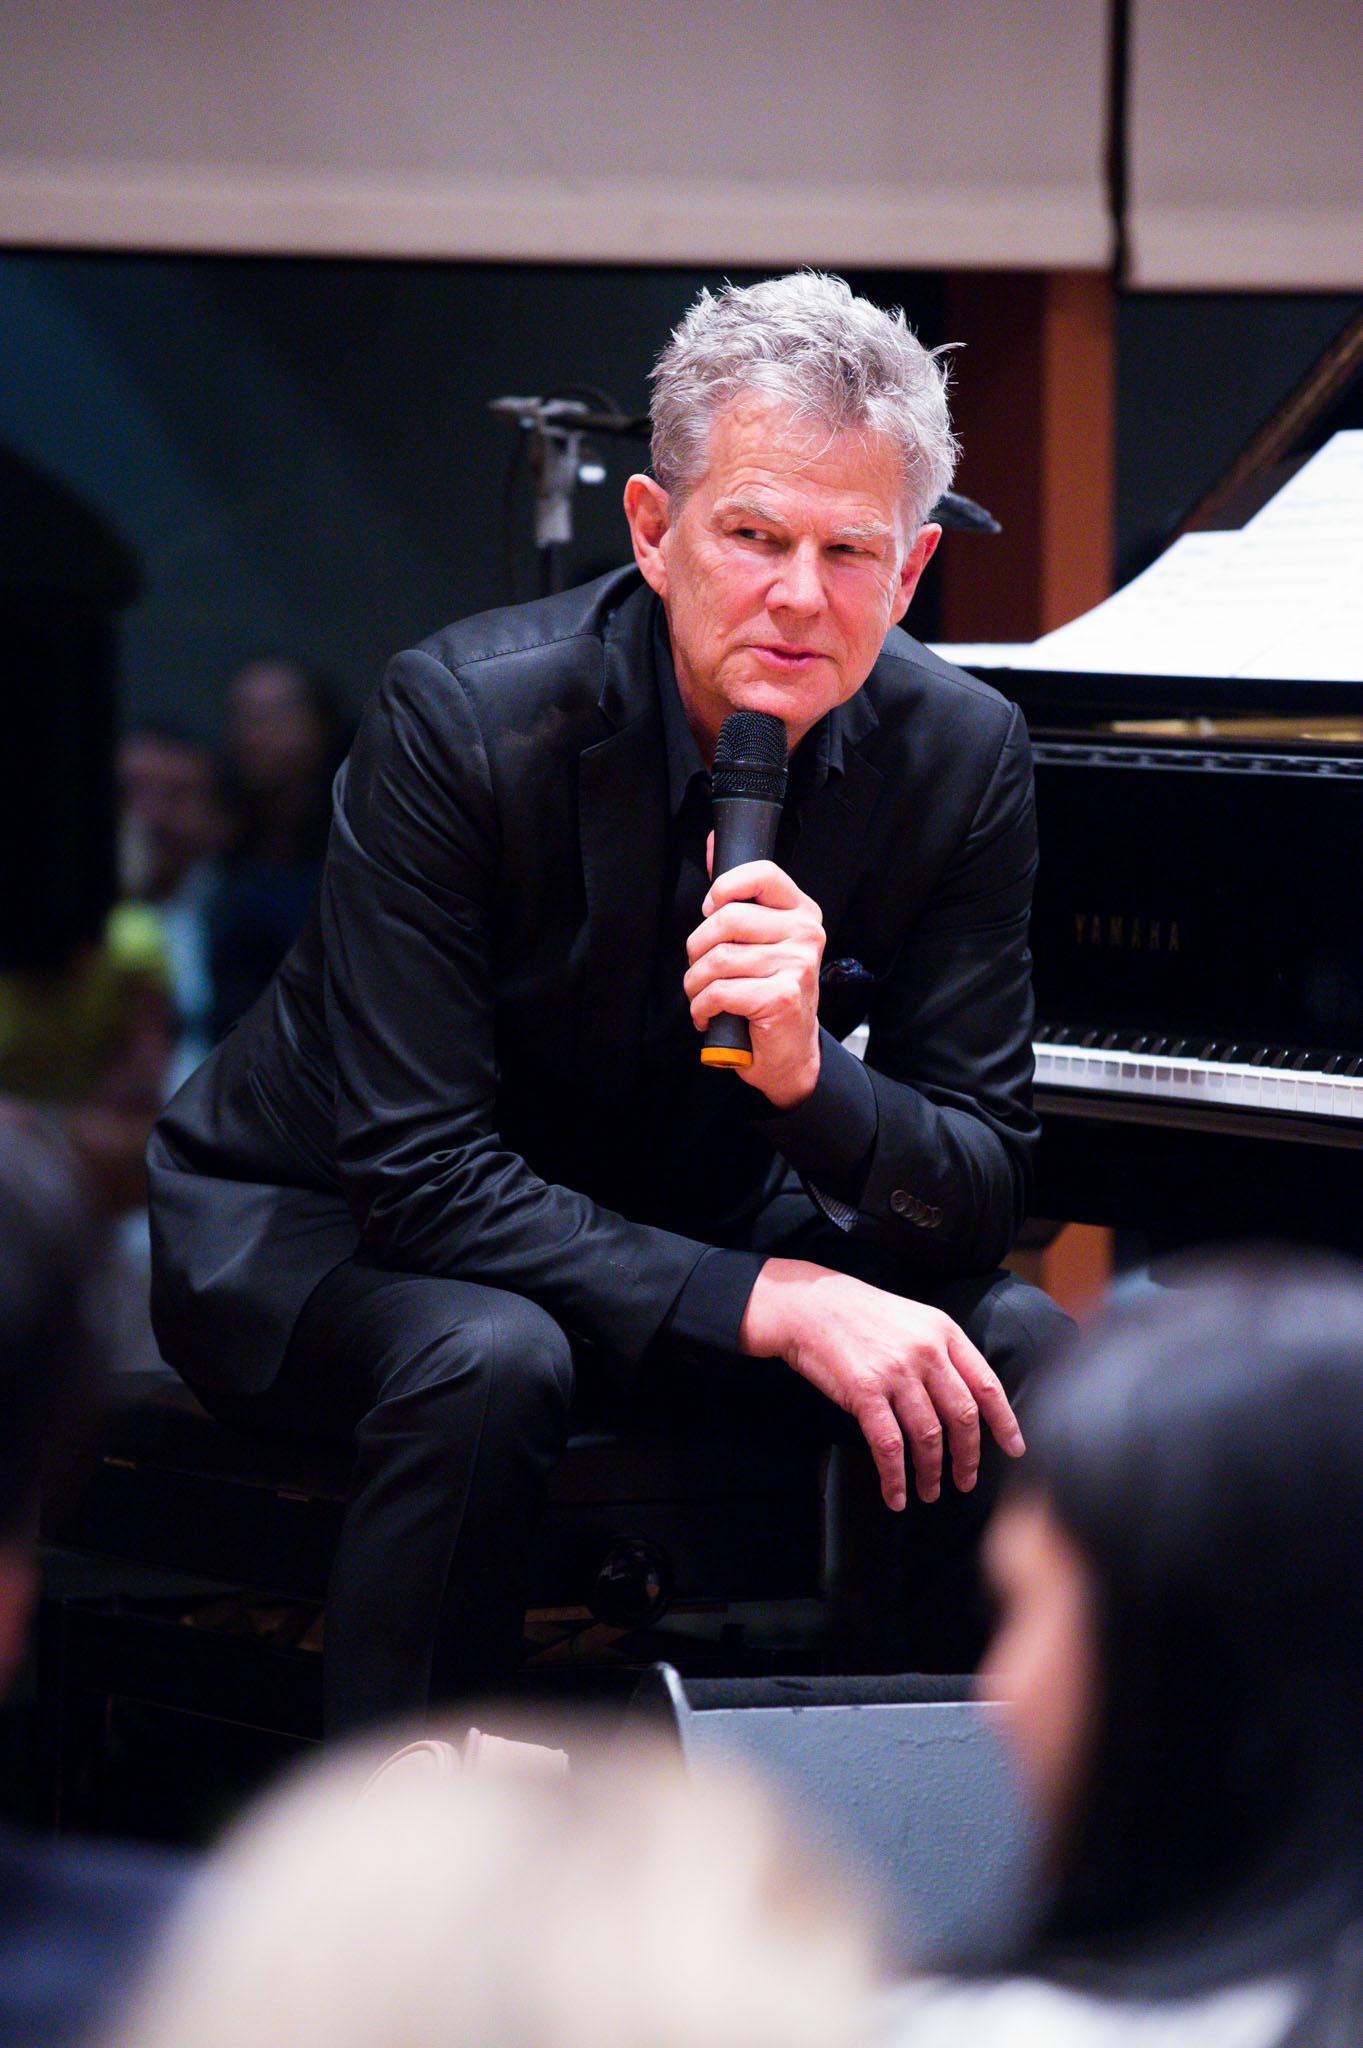 Painist speaking to audience at a concert